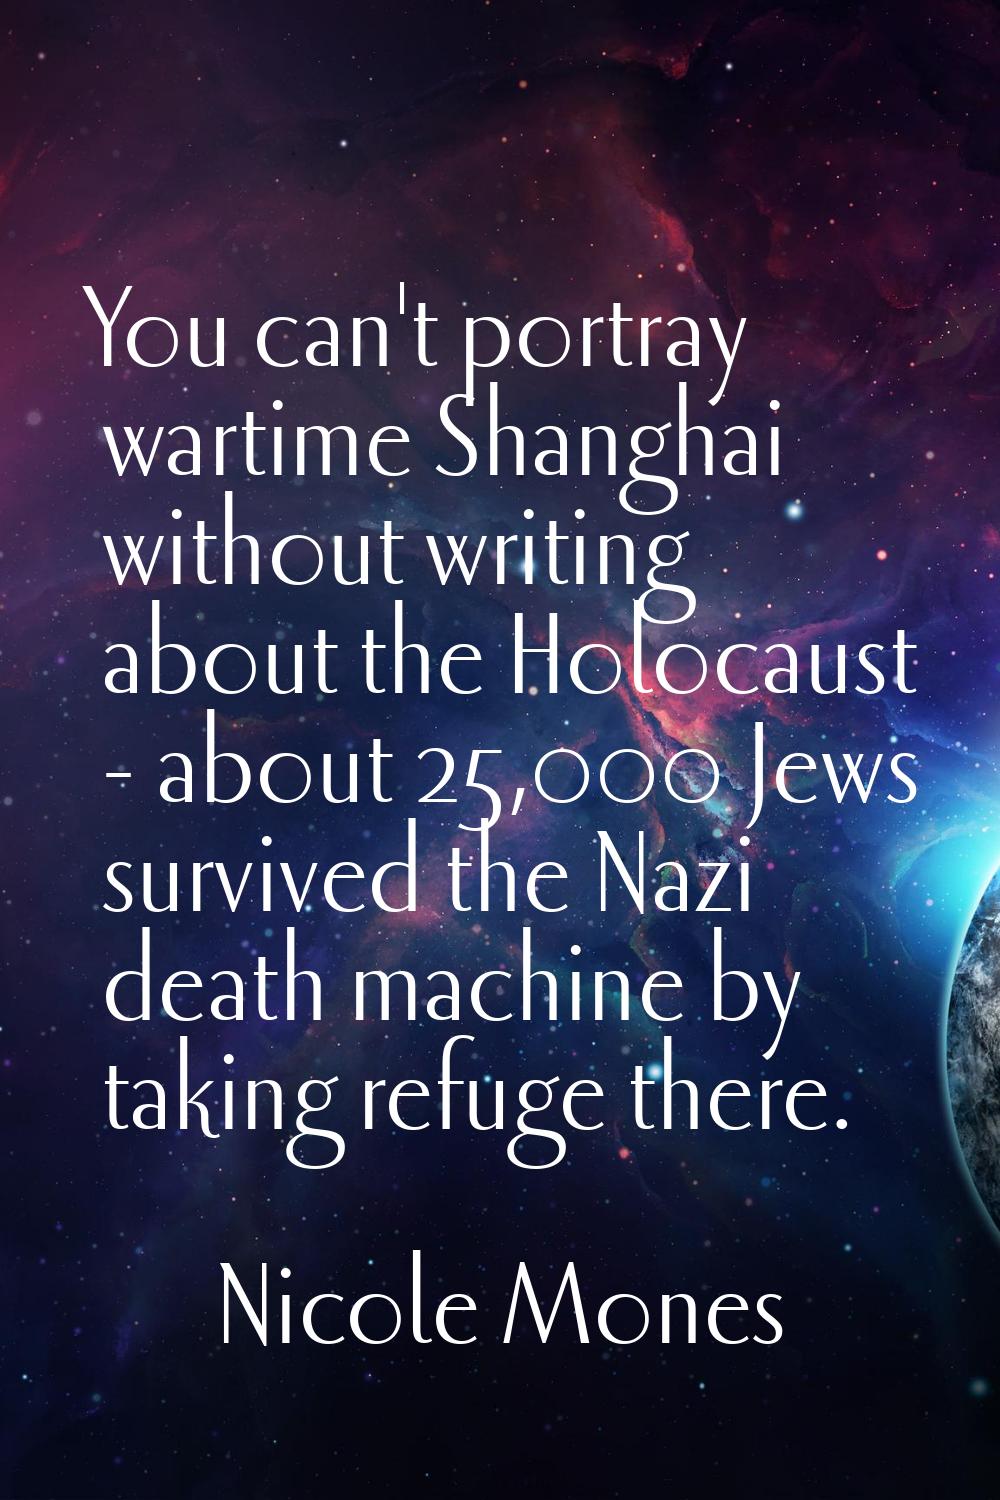 You can't portray wartime Shanghai without writing about the Holocaust - about 25,000 Jews survived